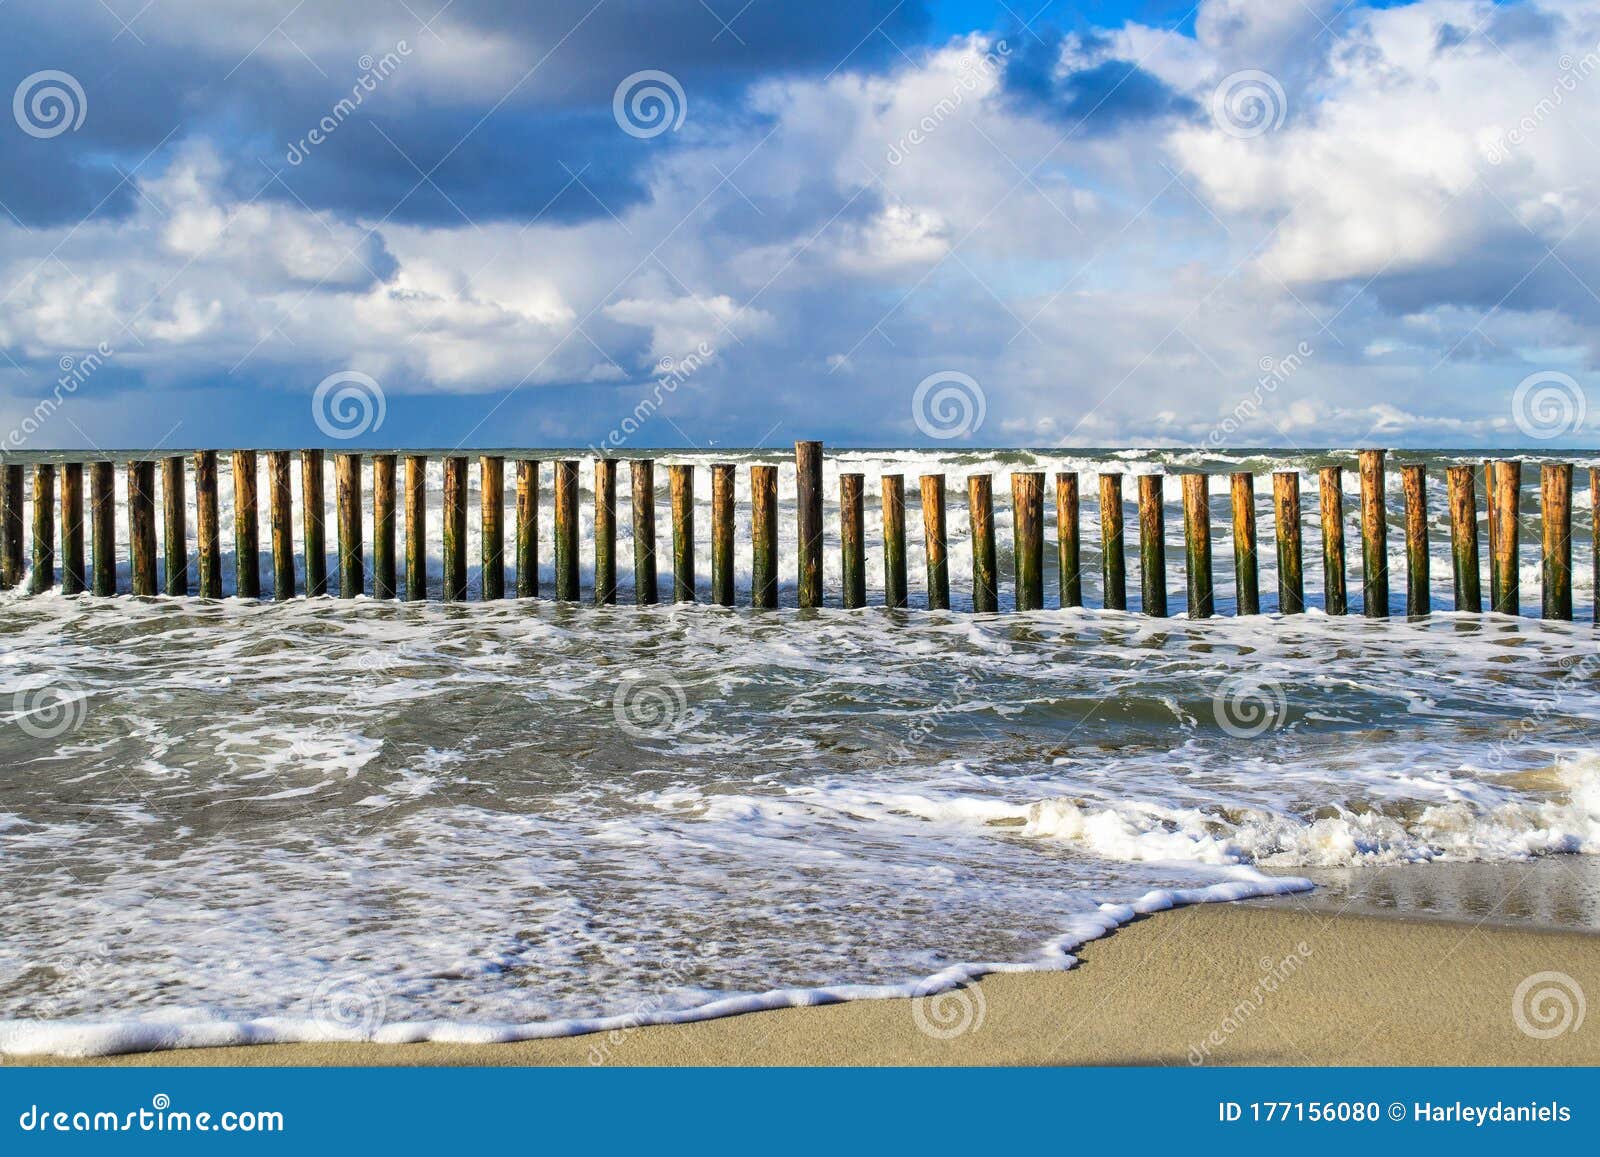 Wooden Breakwater At The Coast Of The Sea Stock Photo - Image of